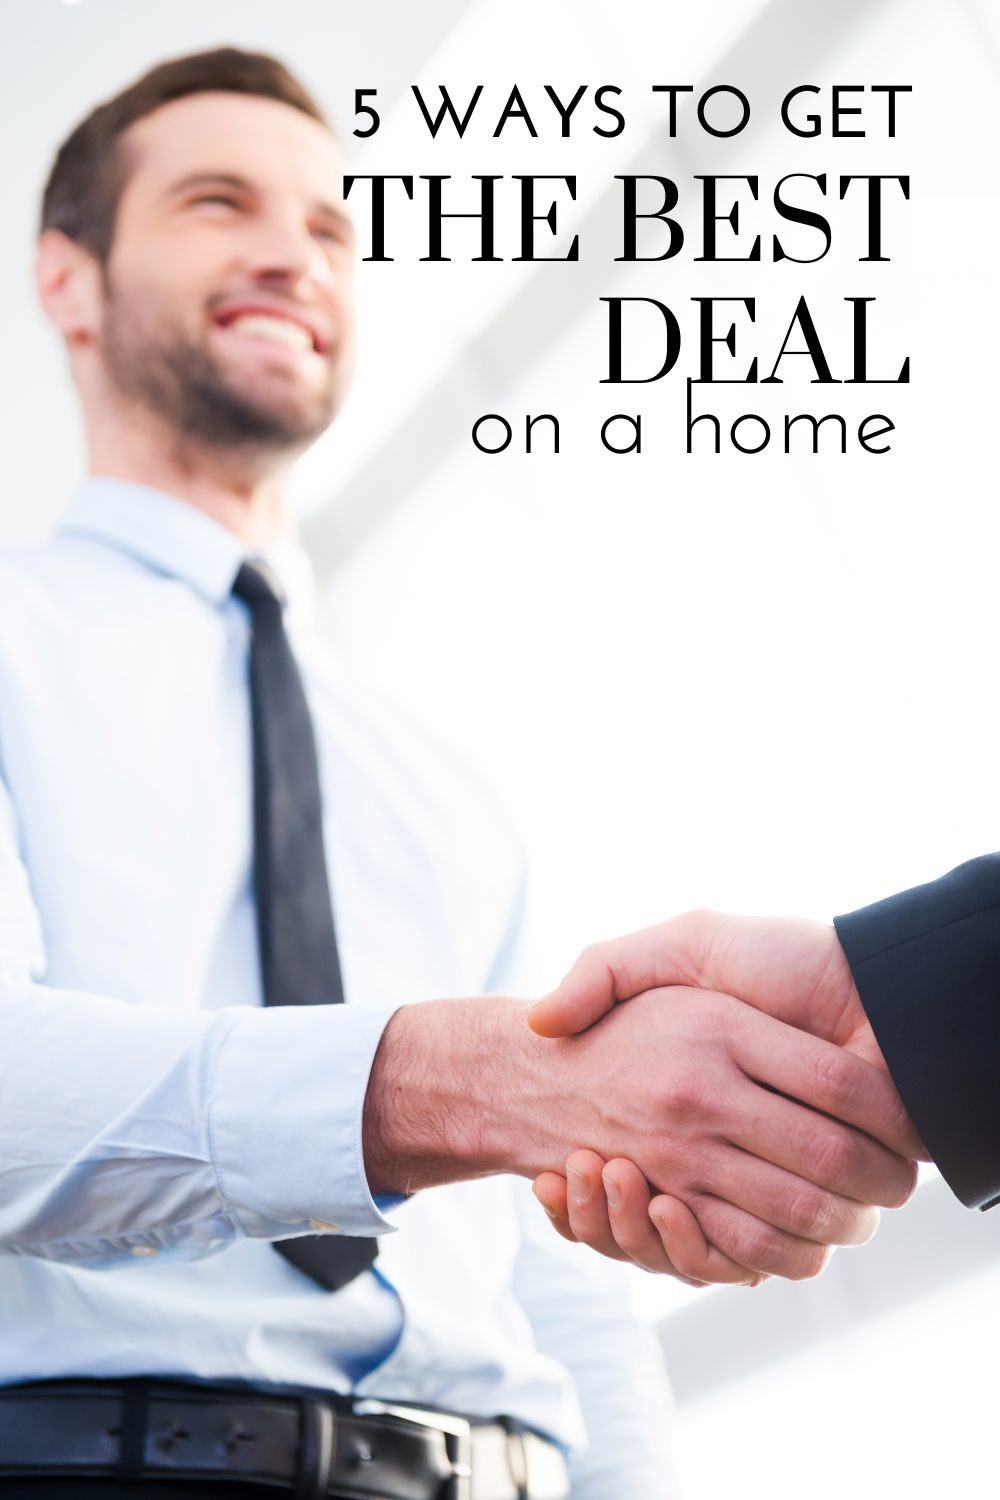 How to Get the Best Deal on a Home